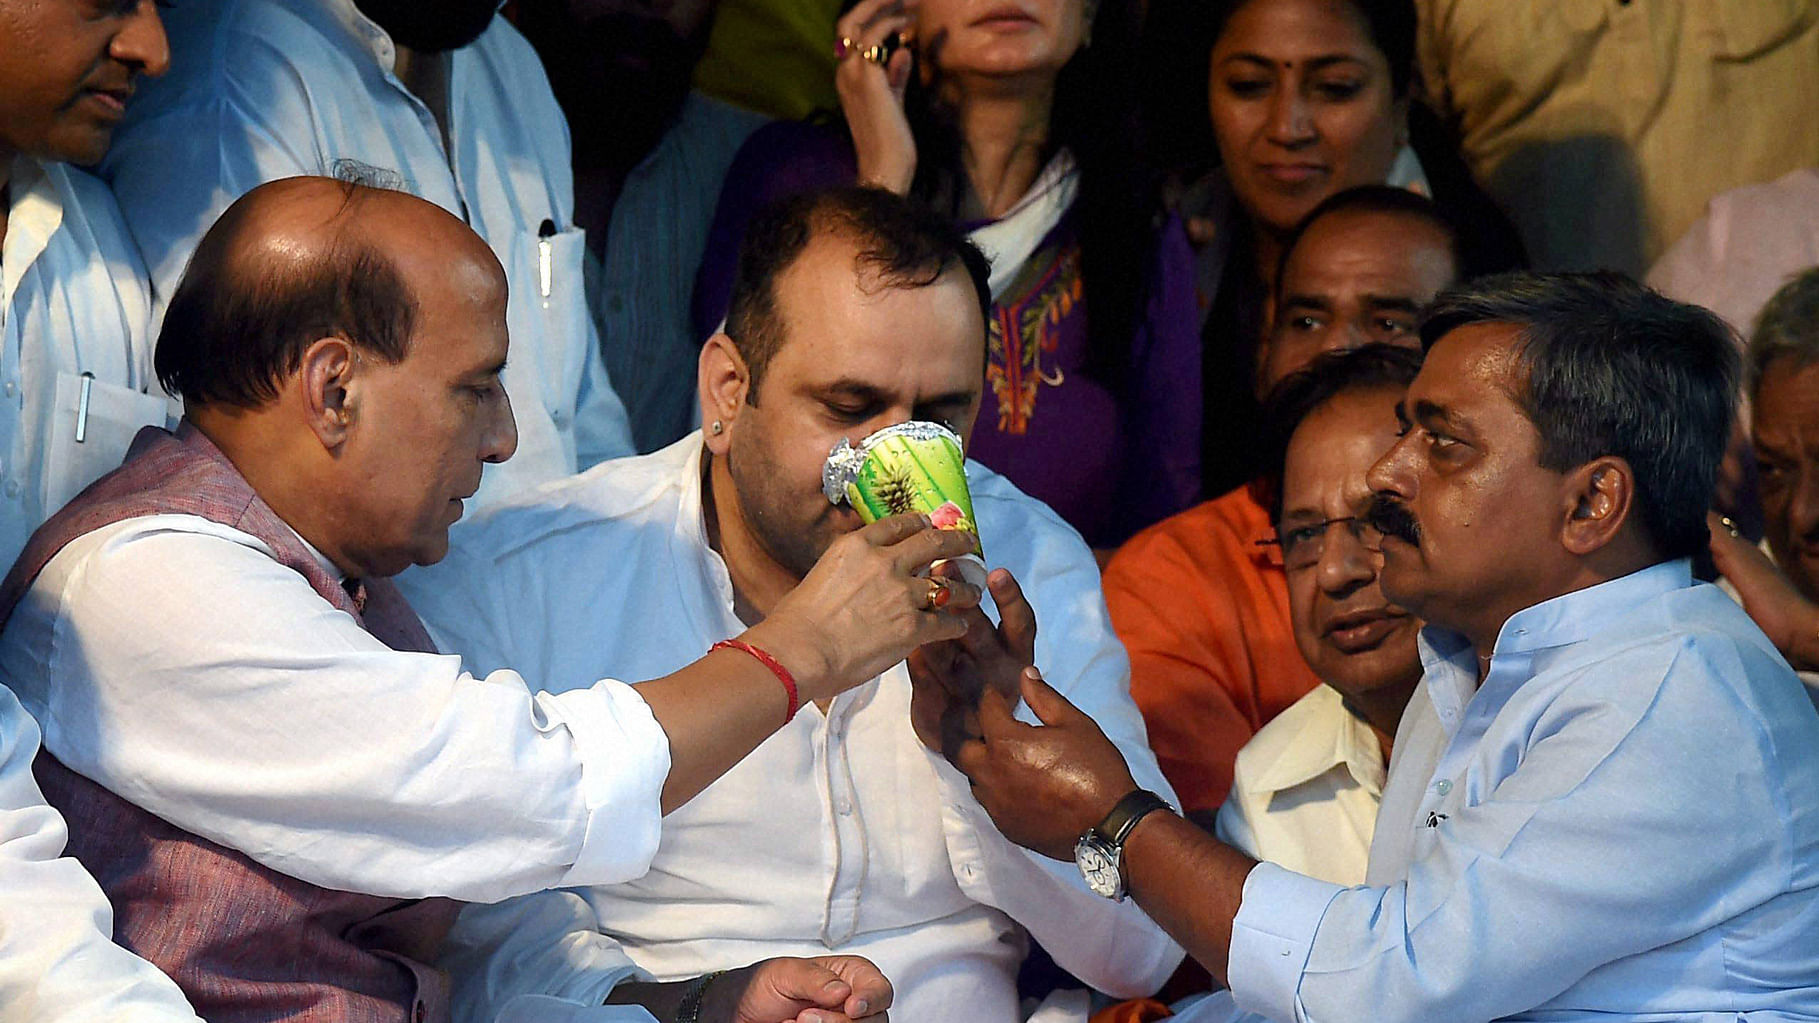  BJP MP Mahesh Giri breaks his fast in the presence of Home Minister Rajnath Singh and other BJP leaders in New Delhi on Tuesday. (Photo: PTI)